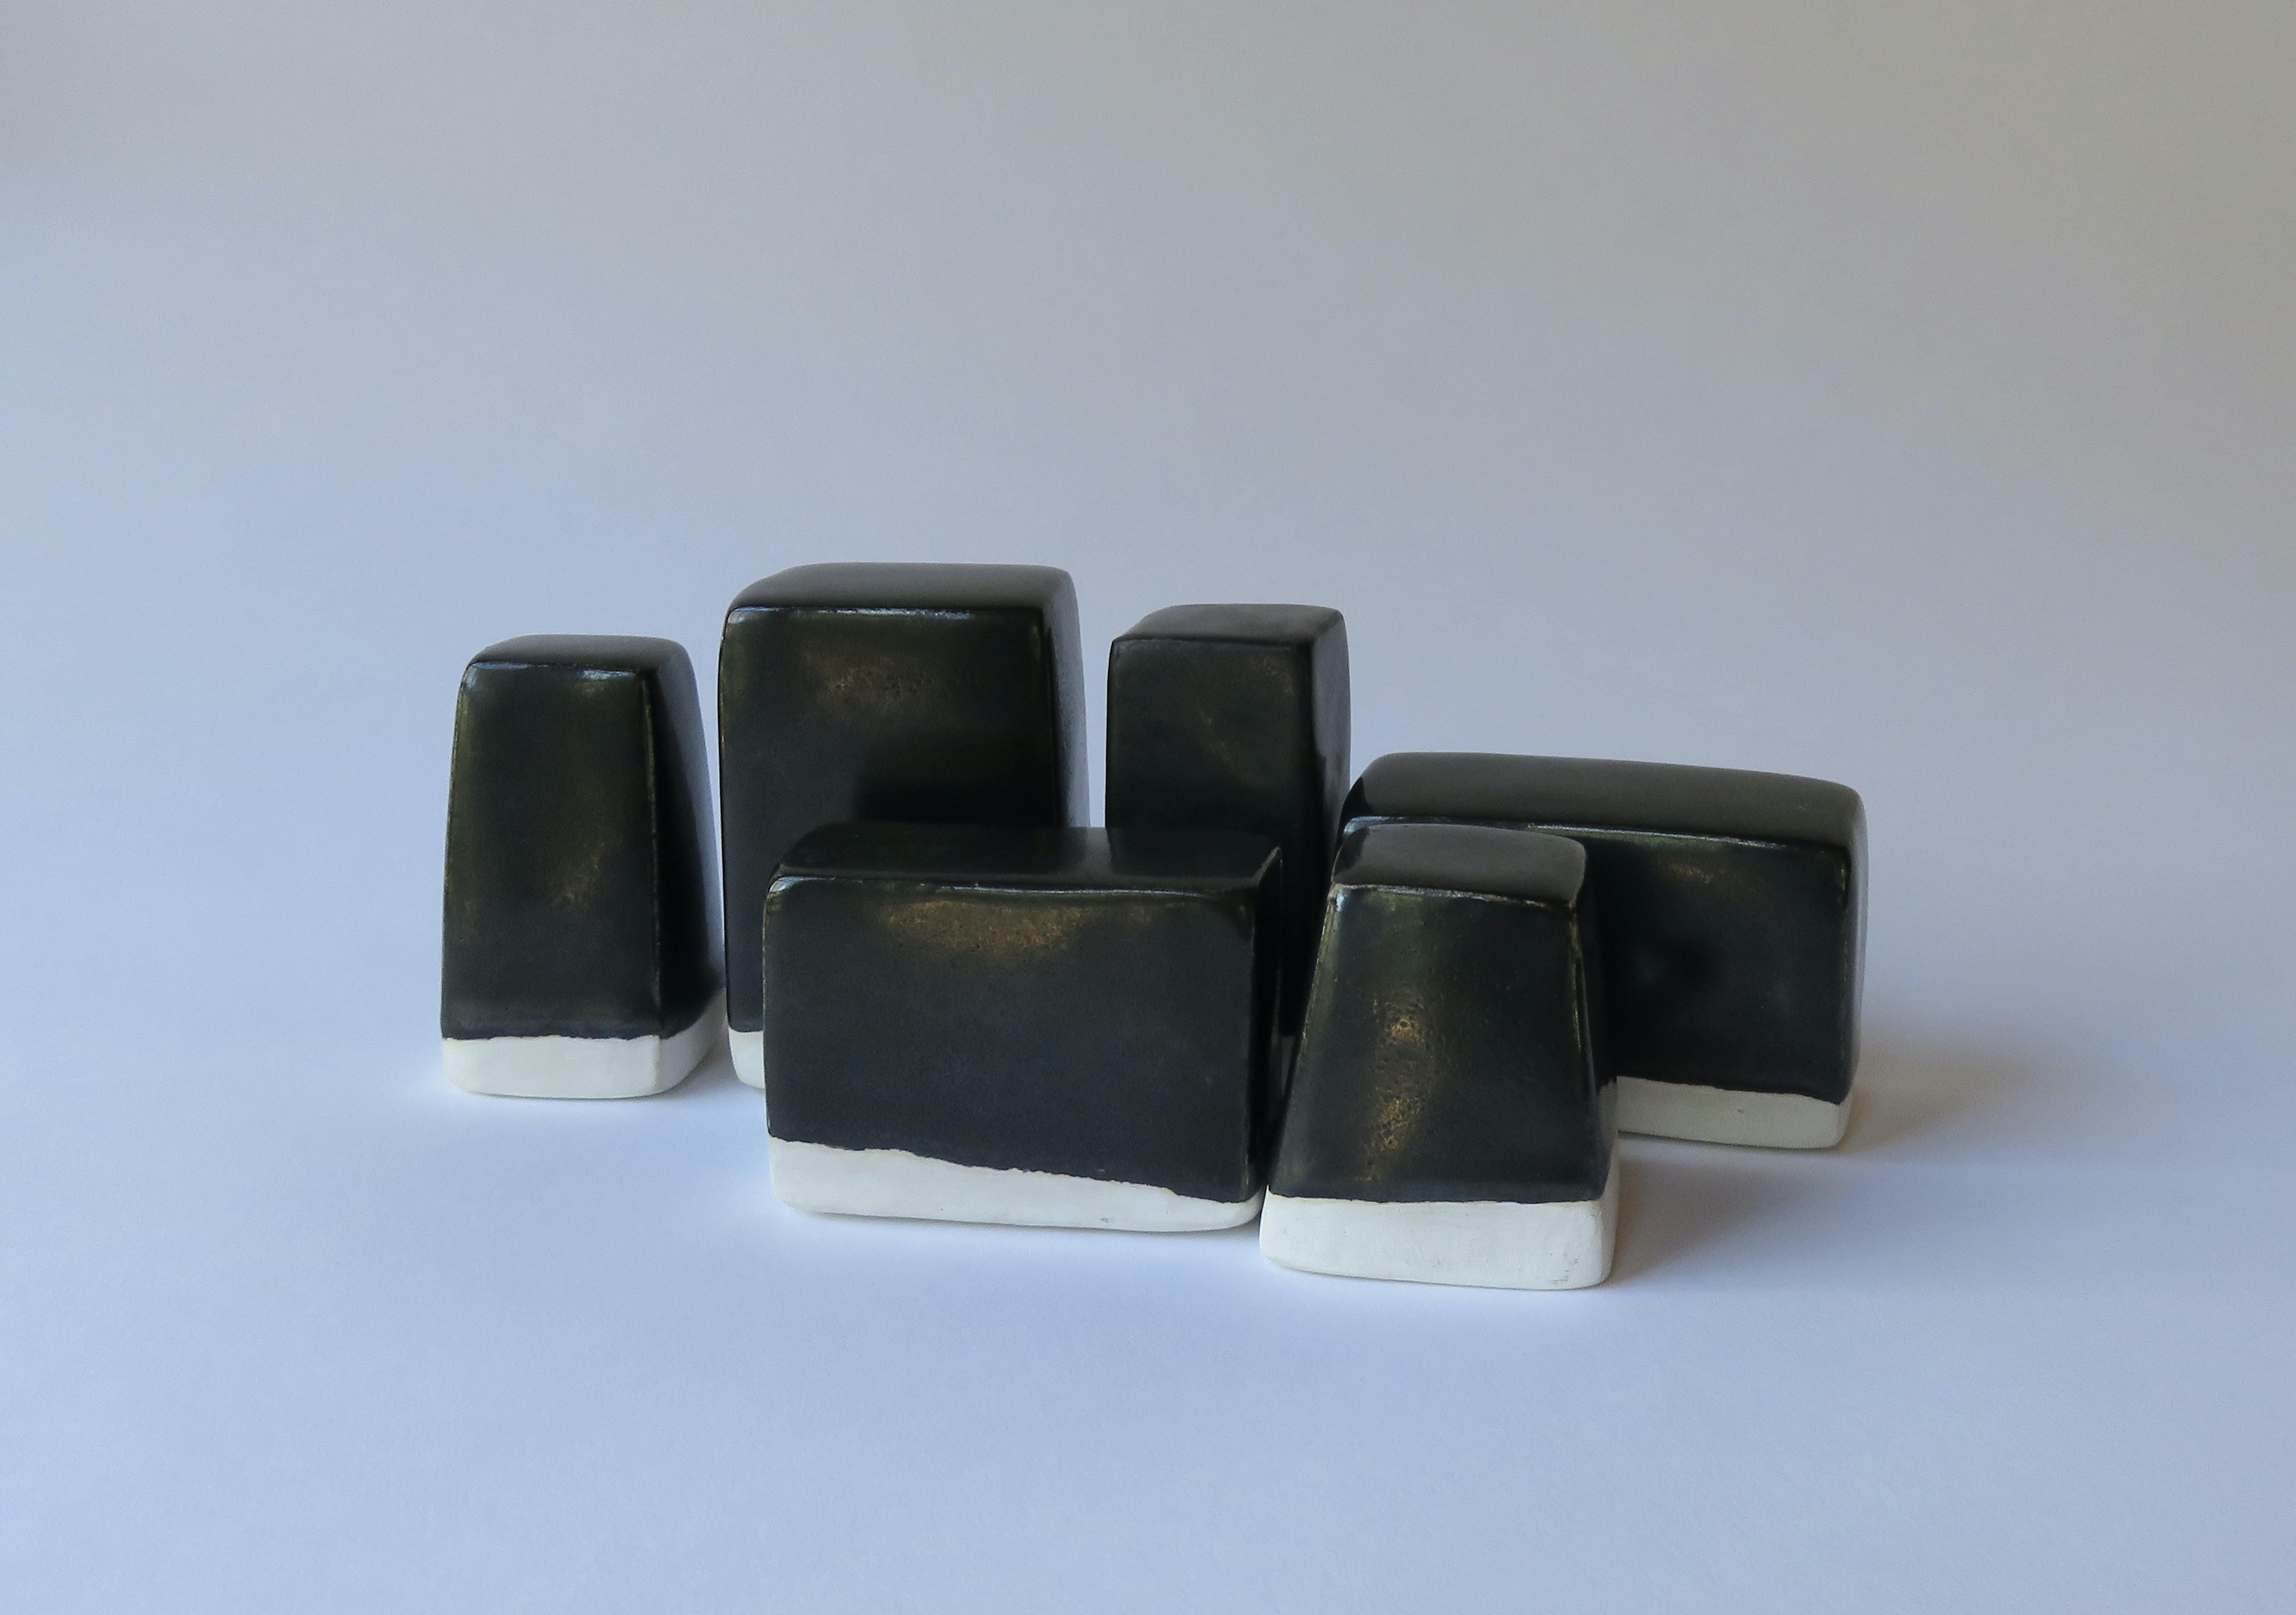 Conceived as a way for the Collector to really interact with a work of art, this series of black glazed ceramic blocks inspire creative energy in the collector. Titled 